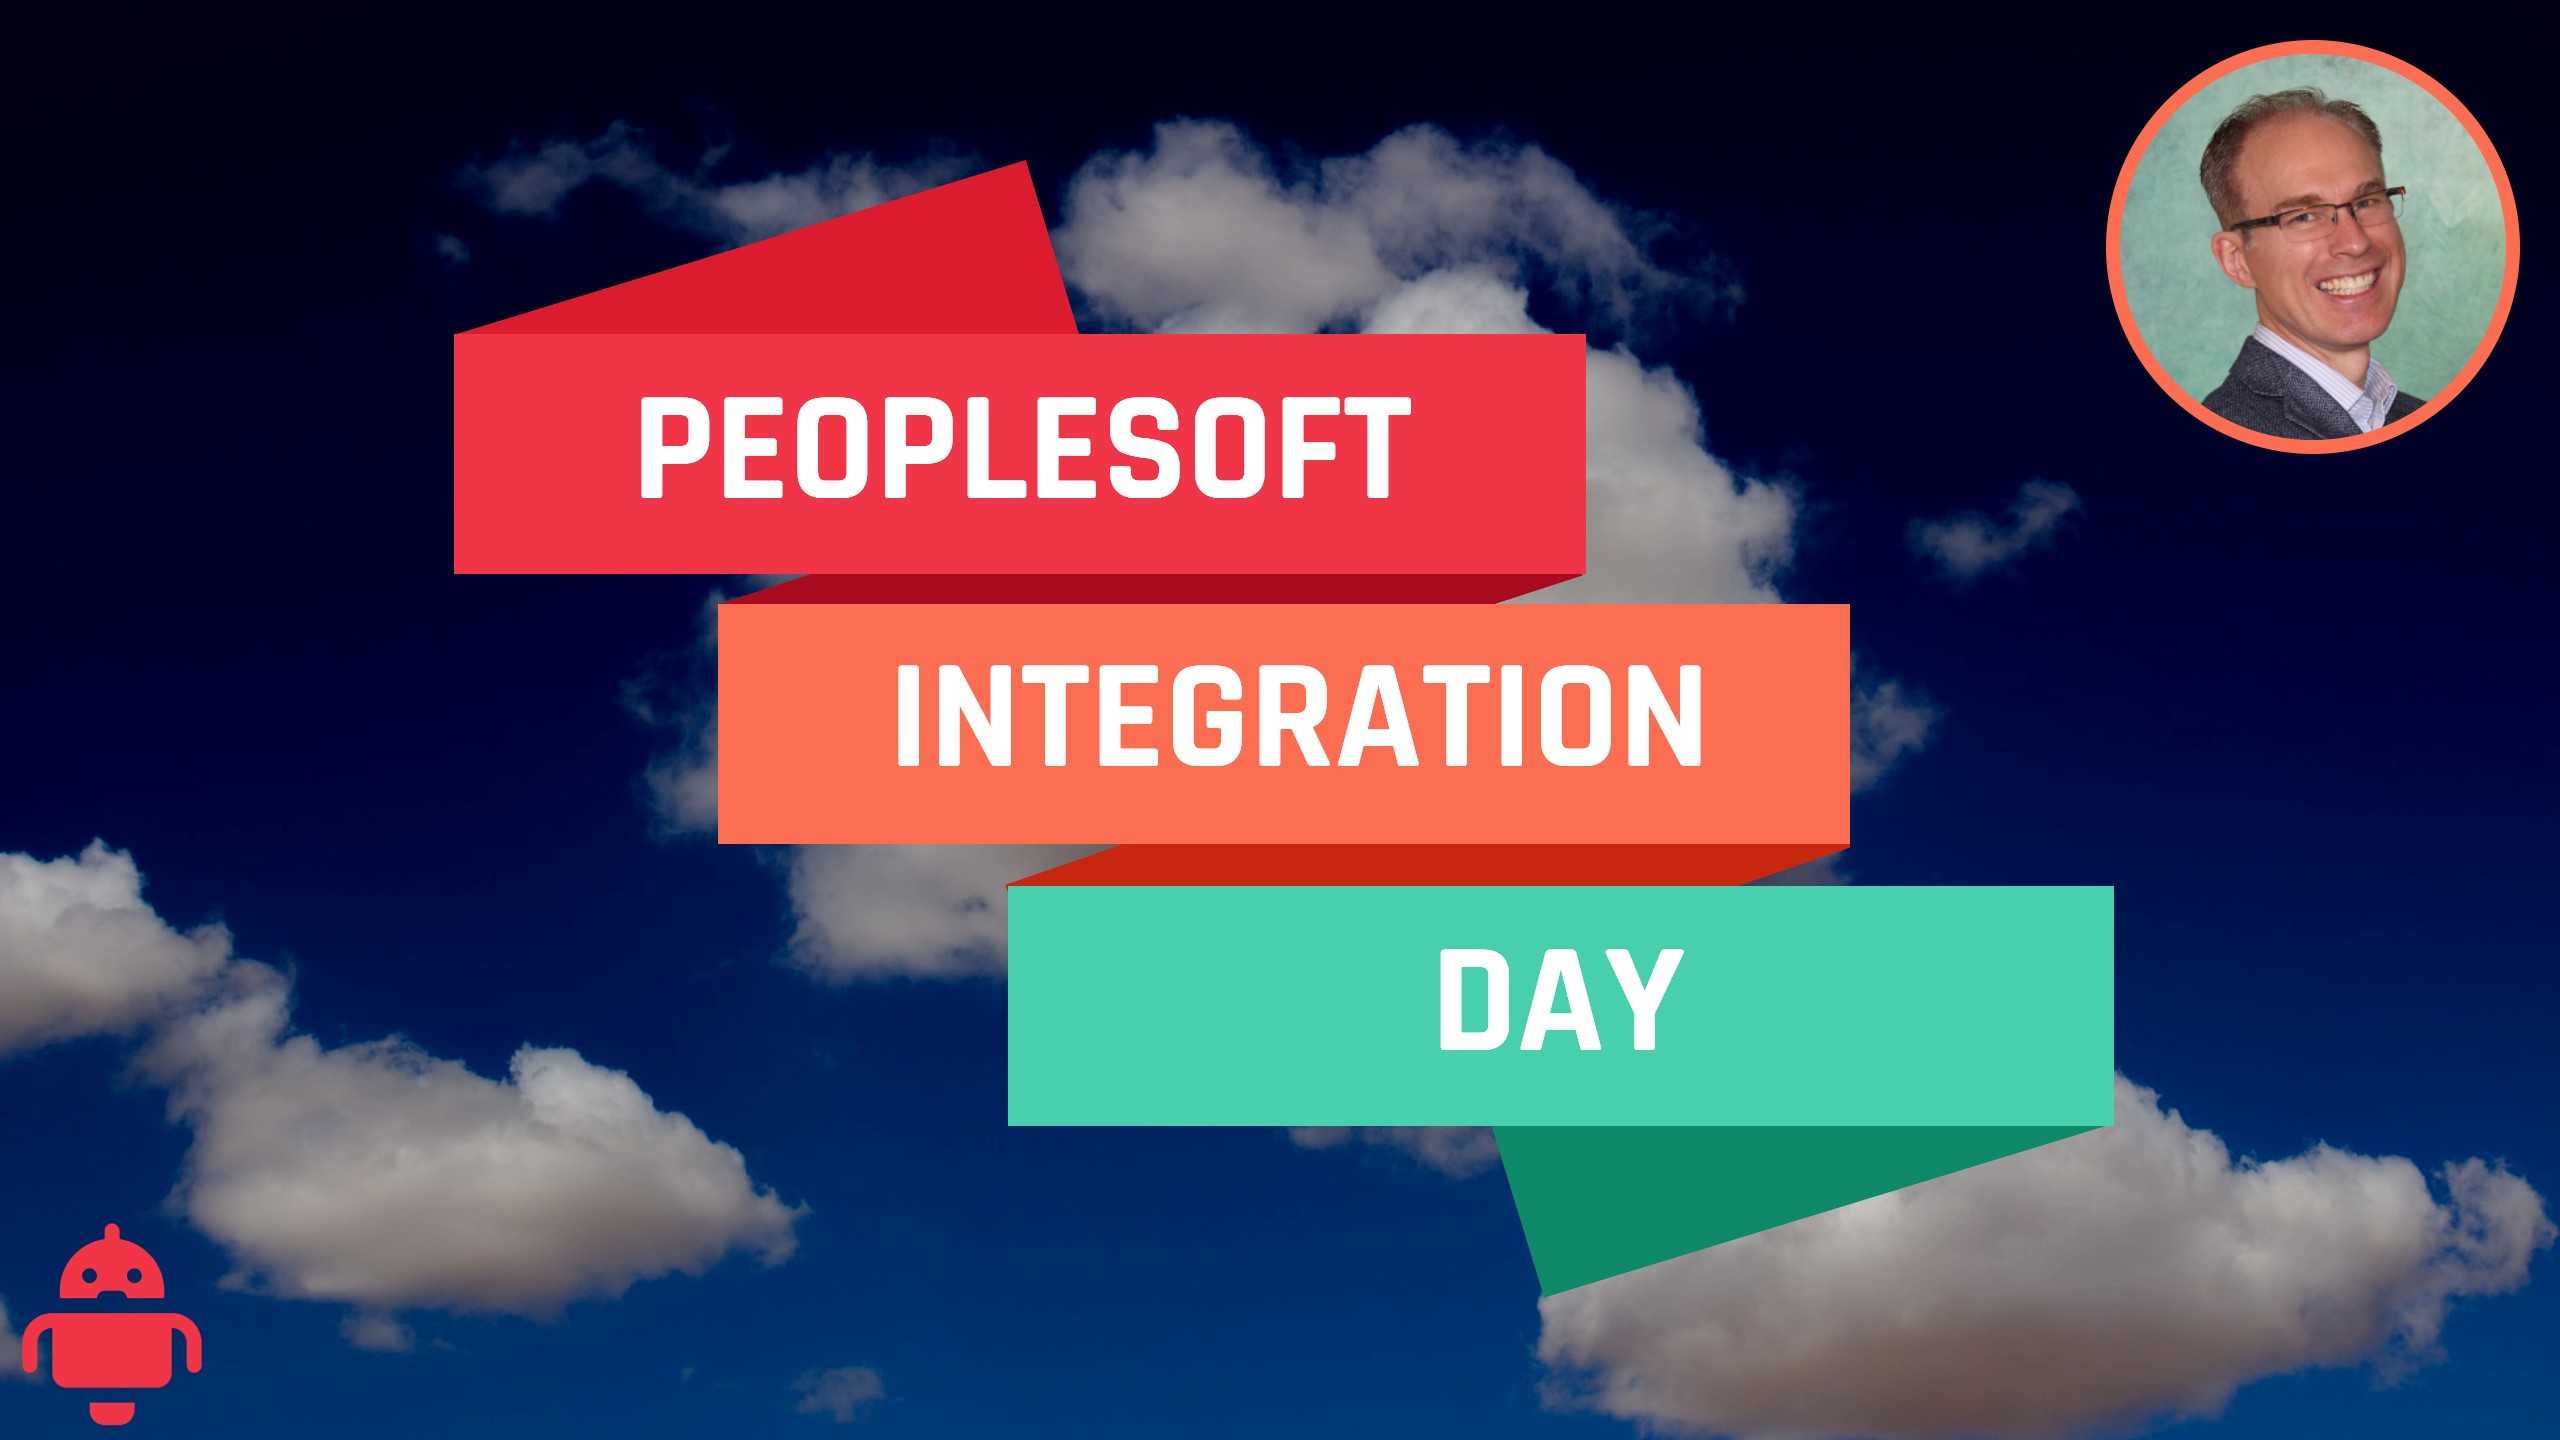 PeopleSoft Integration Day